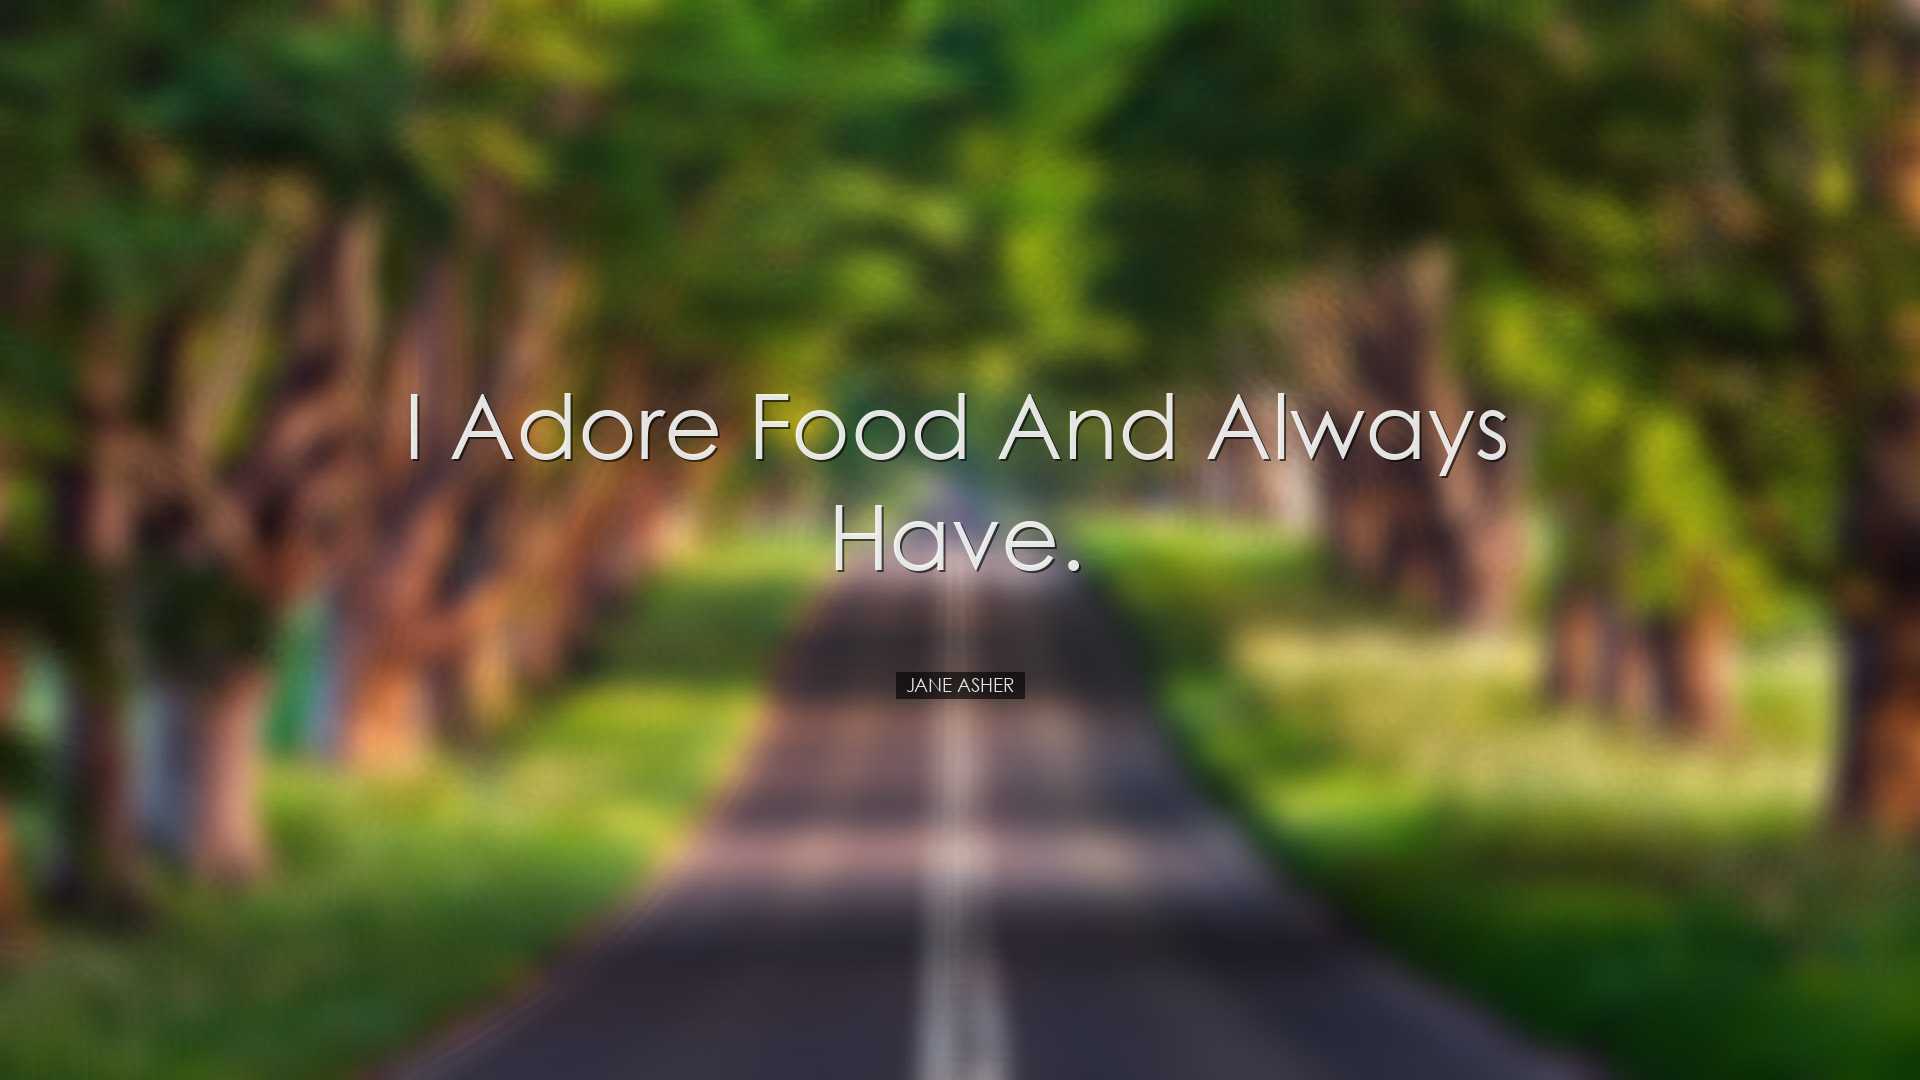 I adore food and always have. - Jane Asher